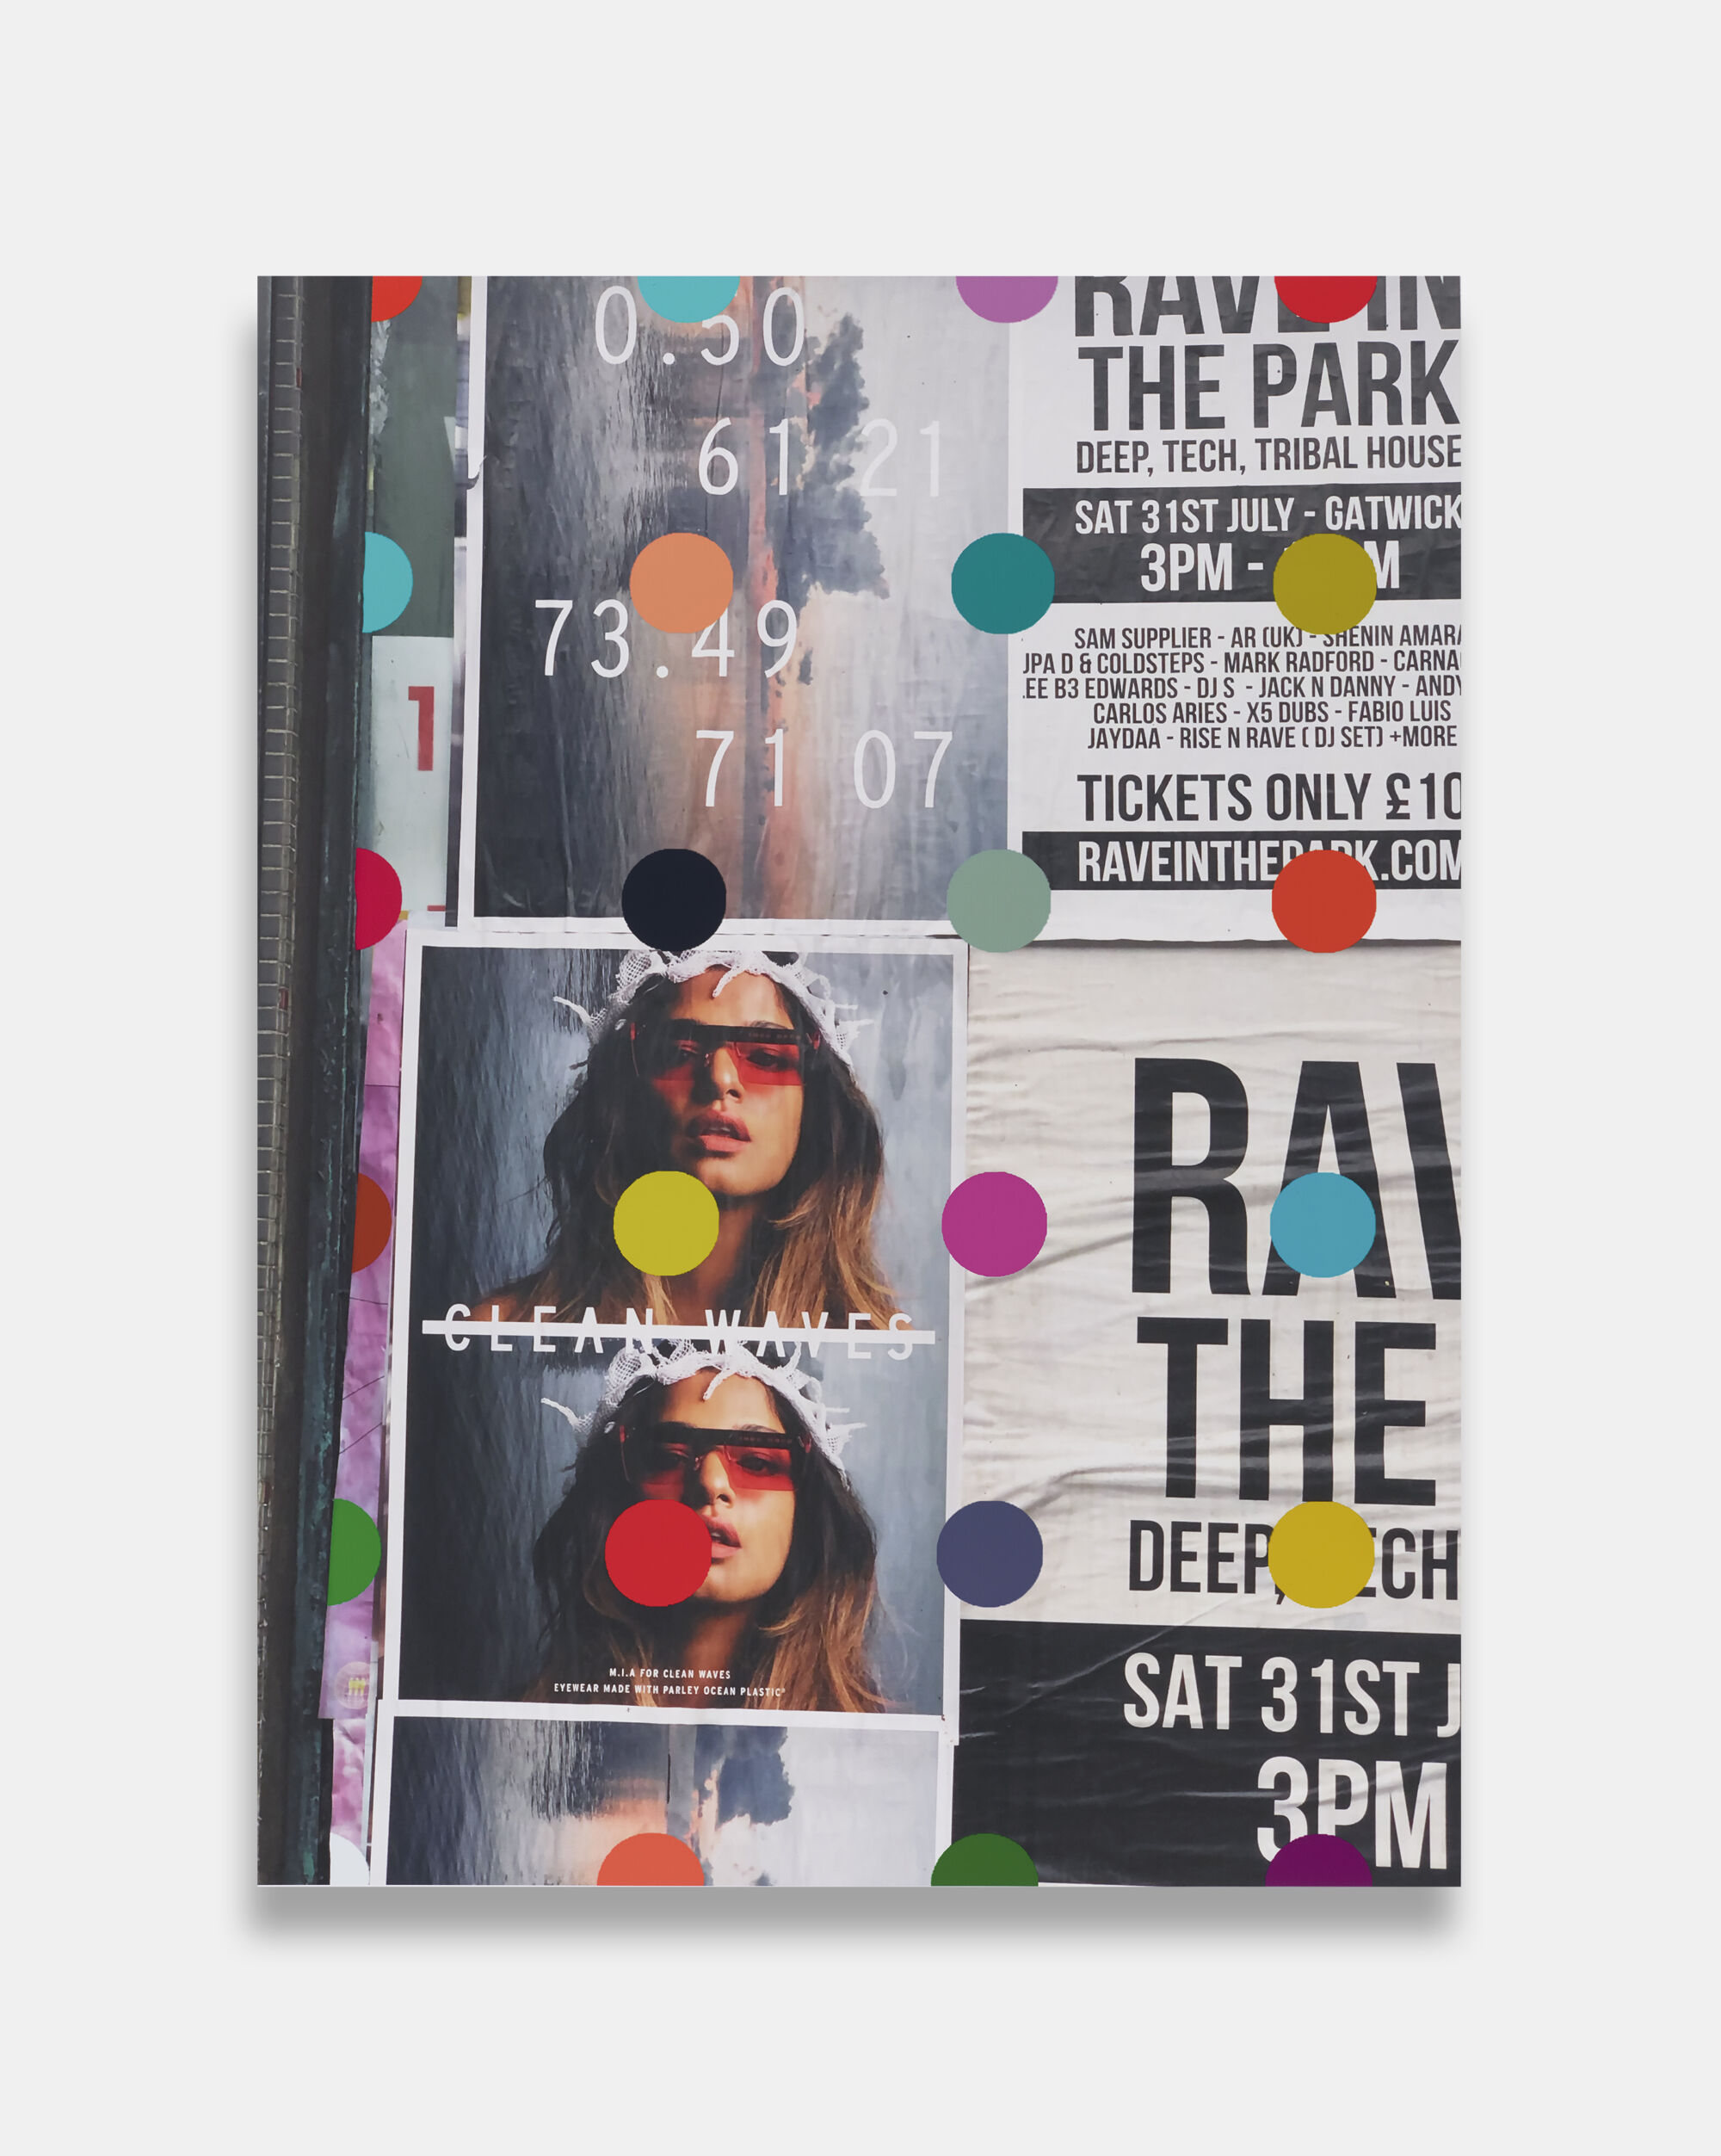 The Wick - Sonia Boyce
On My Way: Rave in the Park, 2022
Digital print and acrylic lacquer on somerset velvet
100 x 75 cm (39 3/8 x 29 1/2 in.)
Courtesy of the artist and Simon Lee Gallery. 
